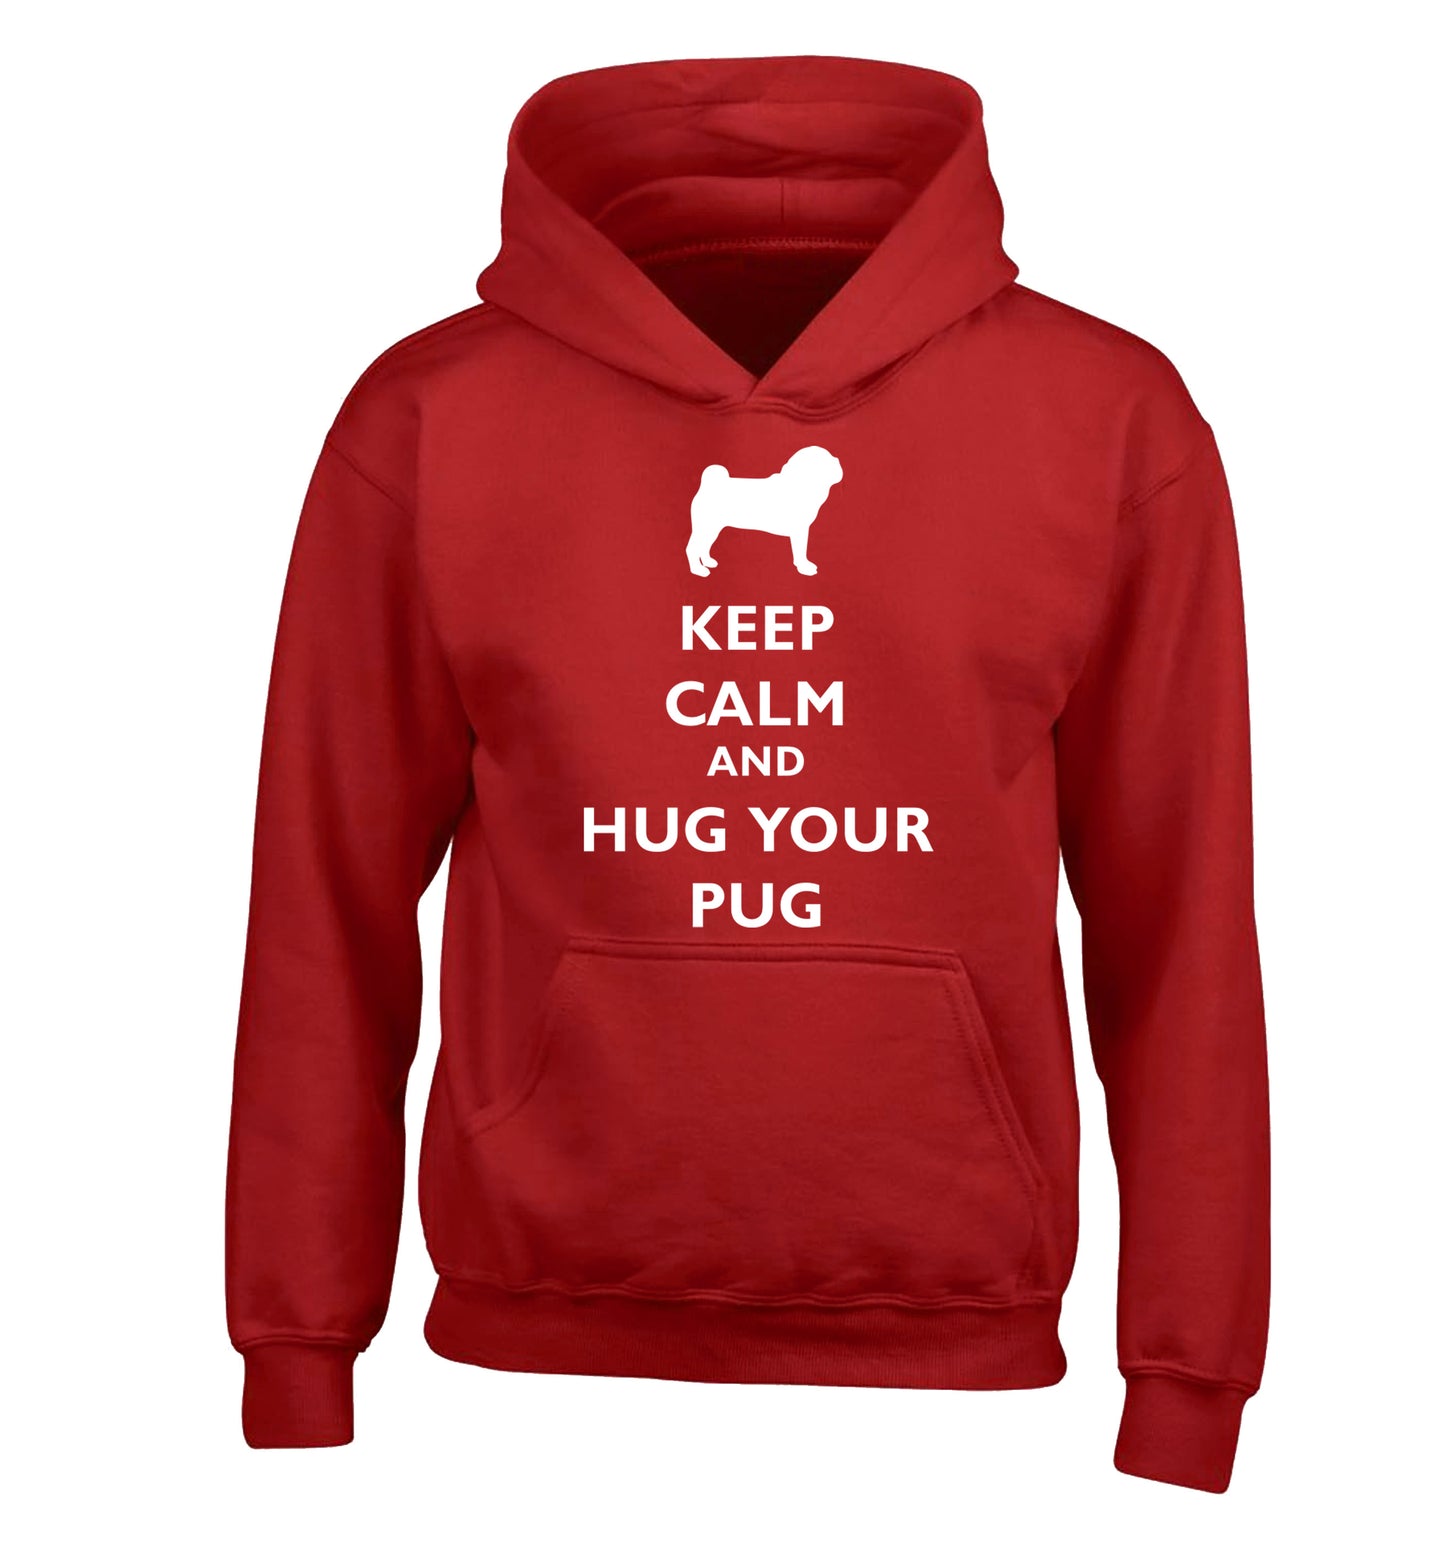 Keep calm and hug your pug children's red hoodie 12-13 Years